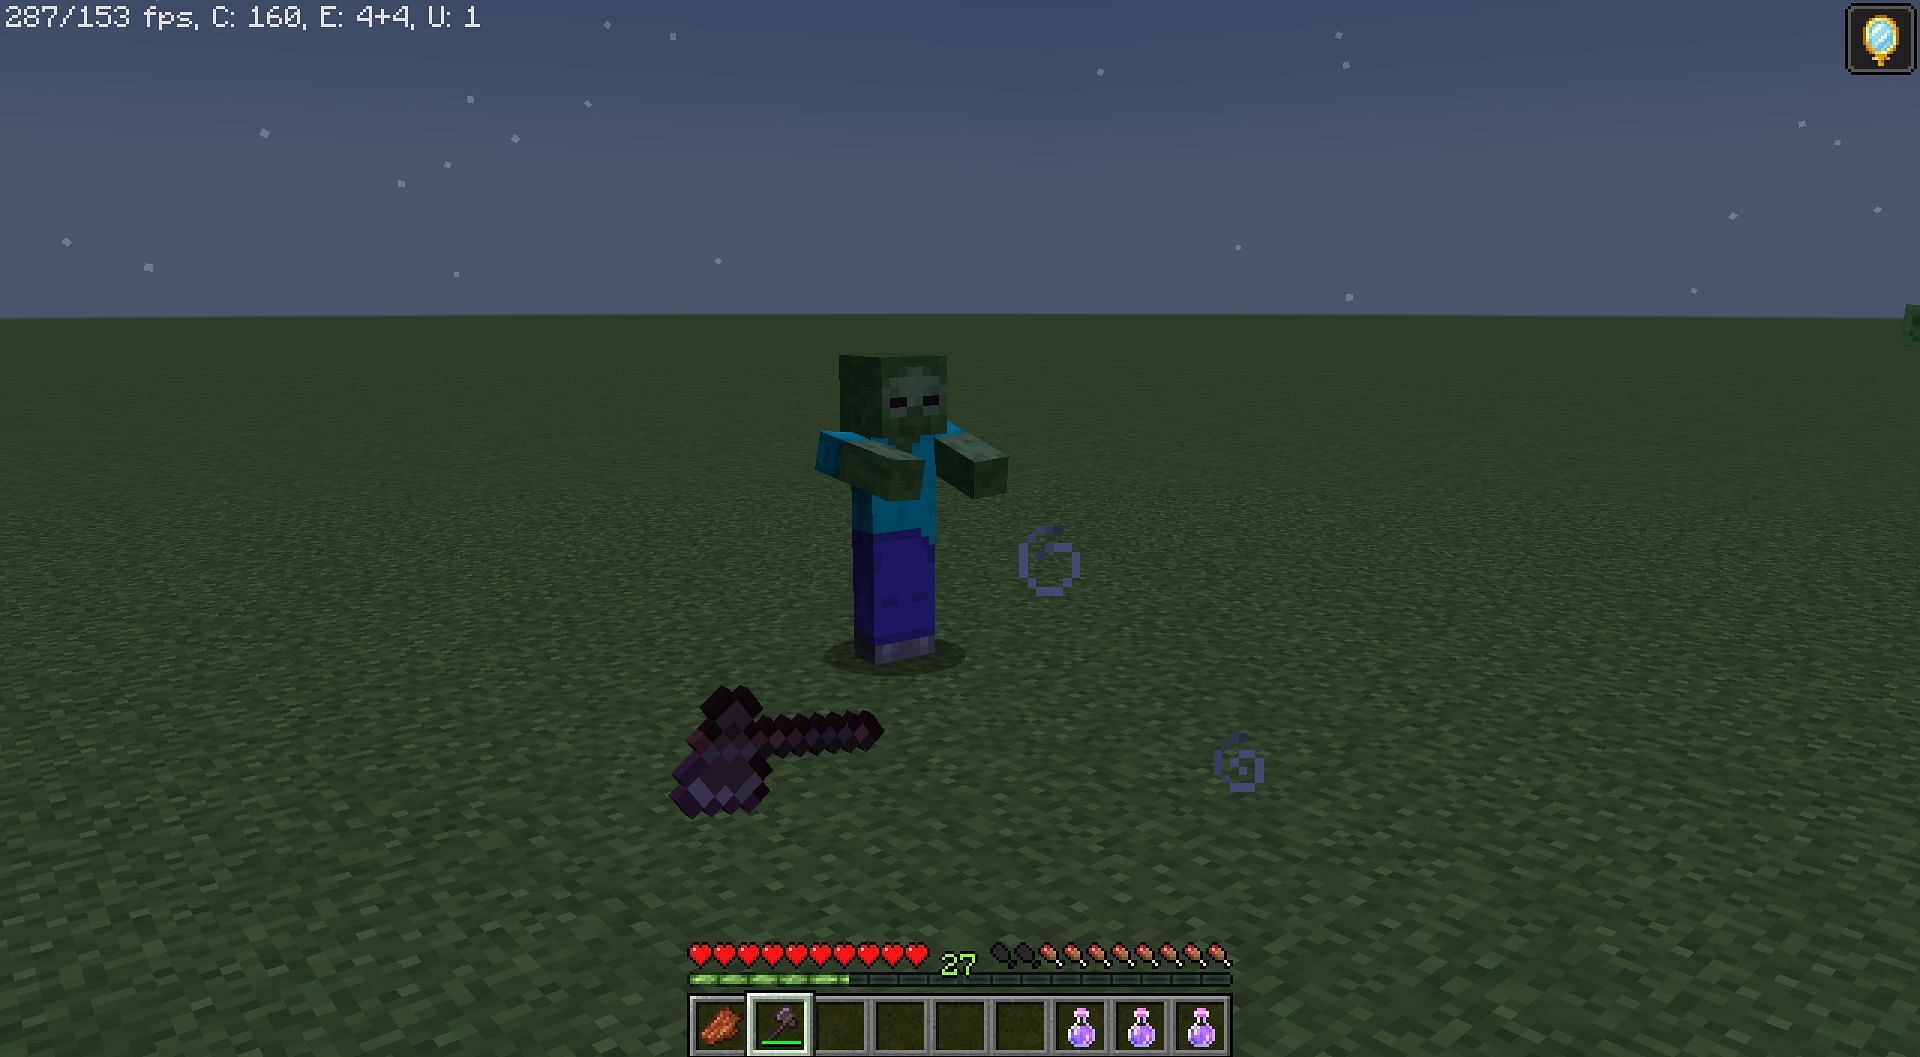 The mob is unable to detect the player since no armor is worn in Minecraft (Image via Mojang)